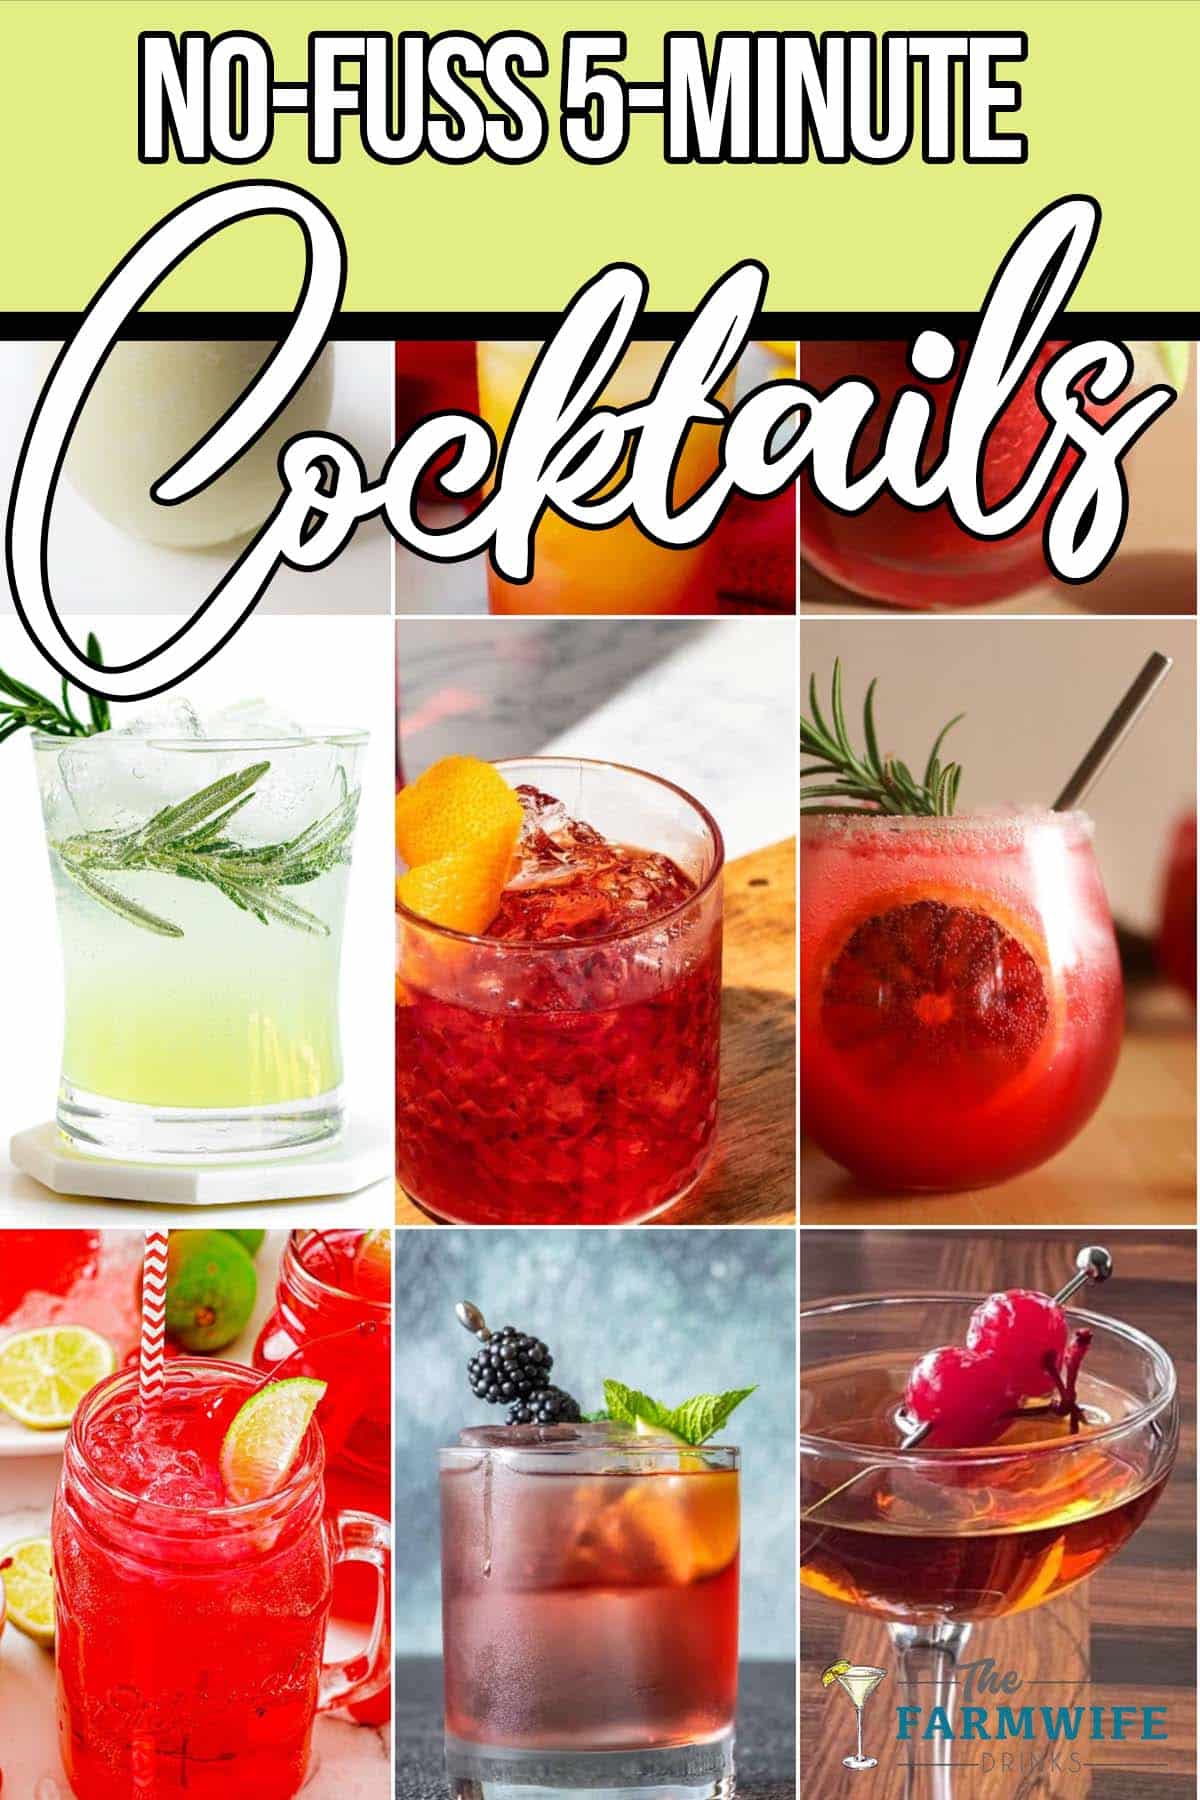 photo collage of no-fuss mixed drinks with text which reads no-fuss 5-minute cocktails